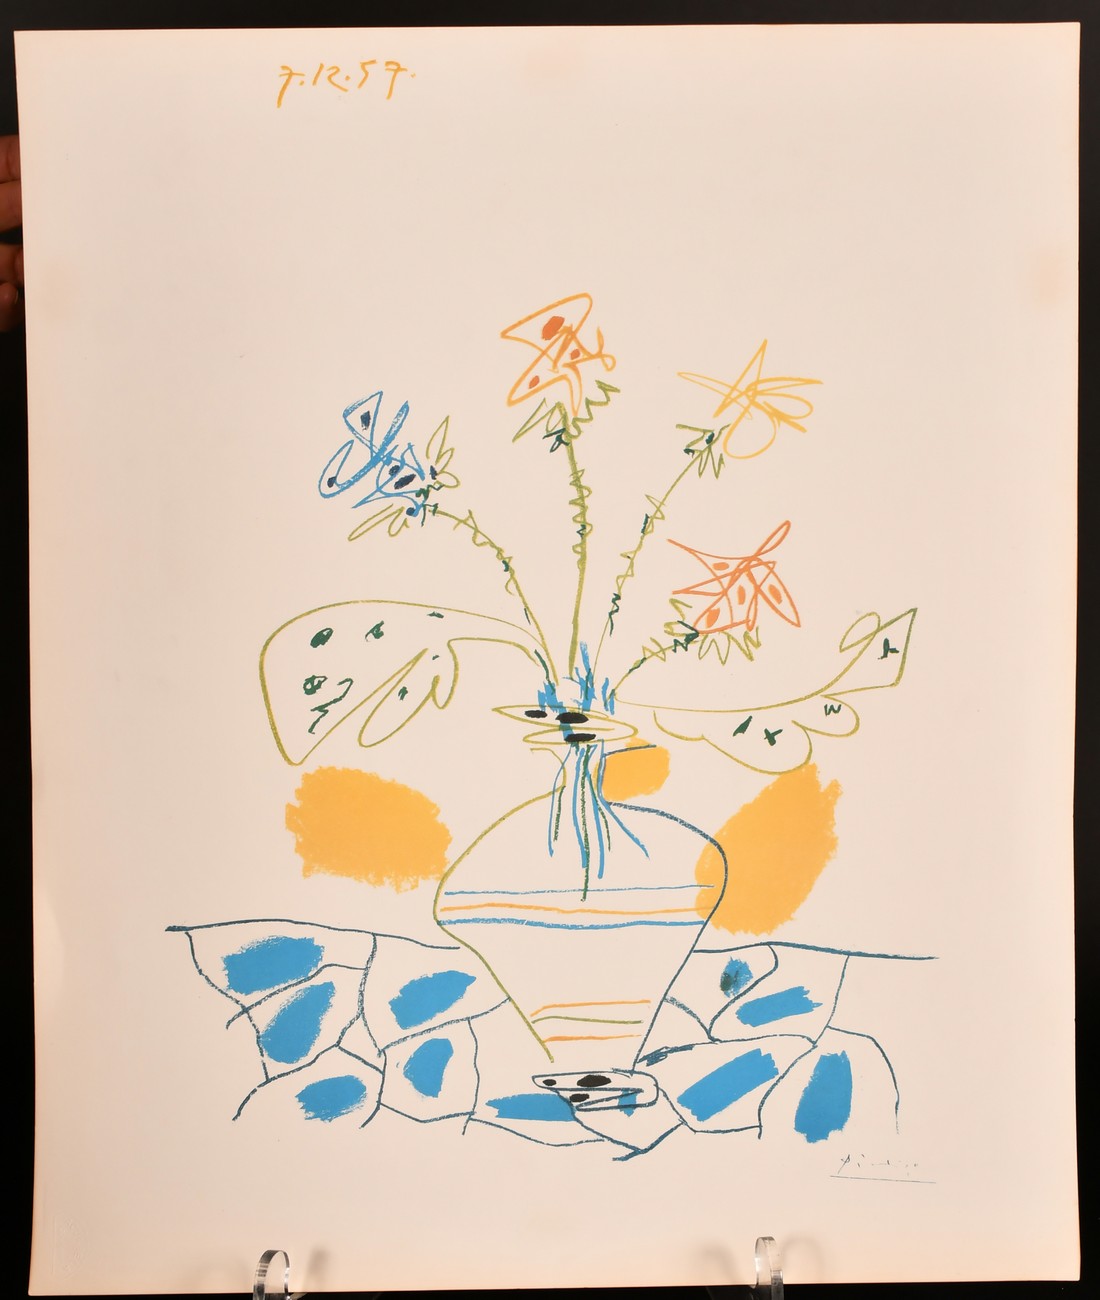 After Picasso, 'Vase with Flowers', lithograph, published 1983, 23" x 18" (58 x 46cm), unframed, a/ - Image 2 of 3